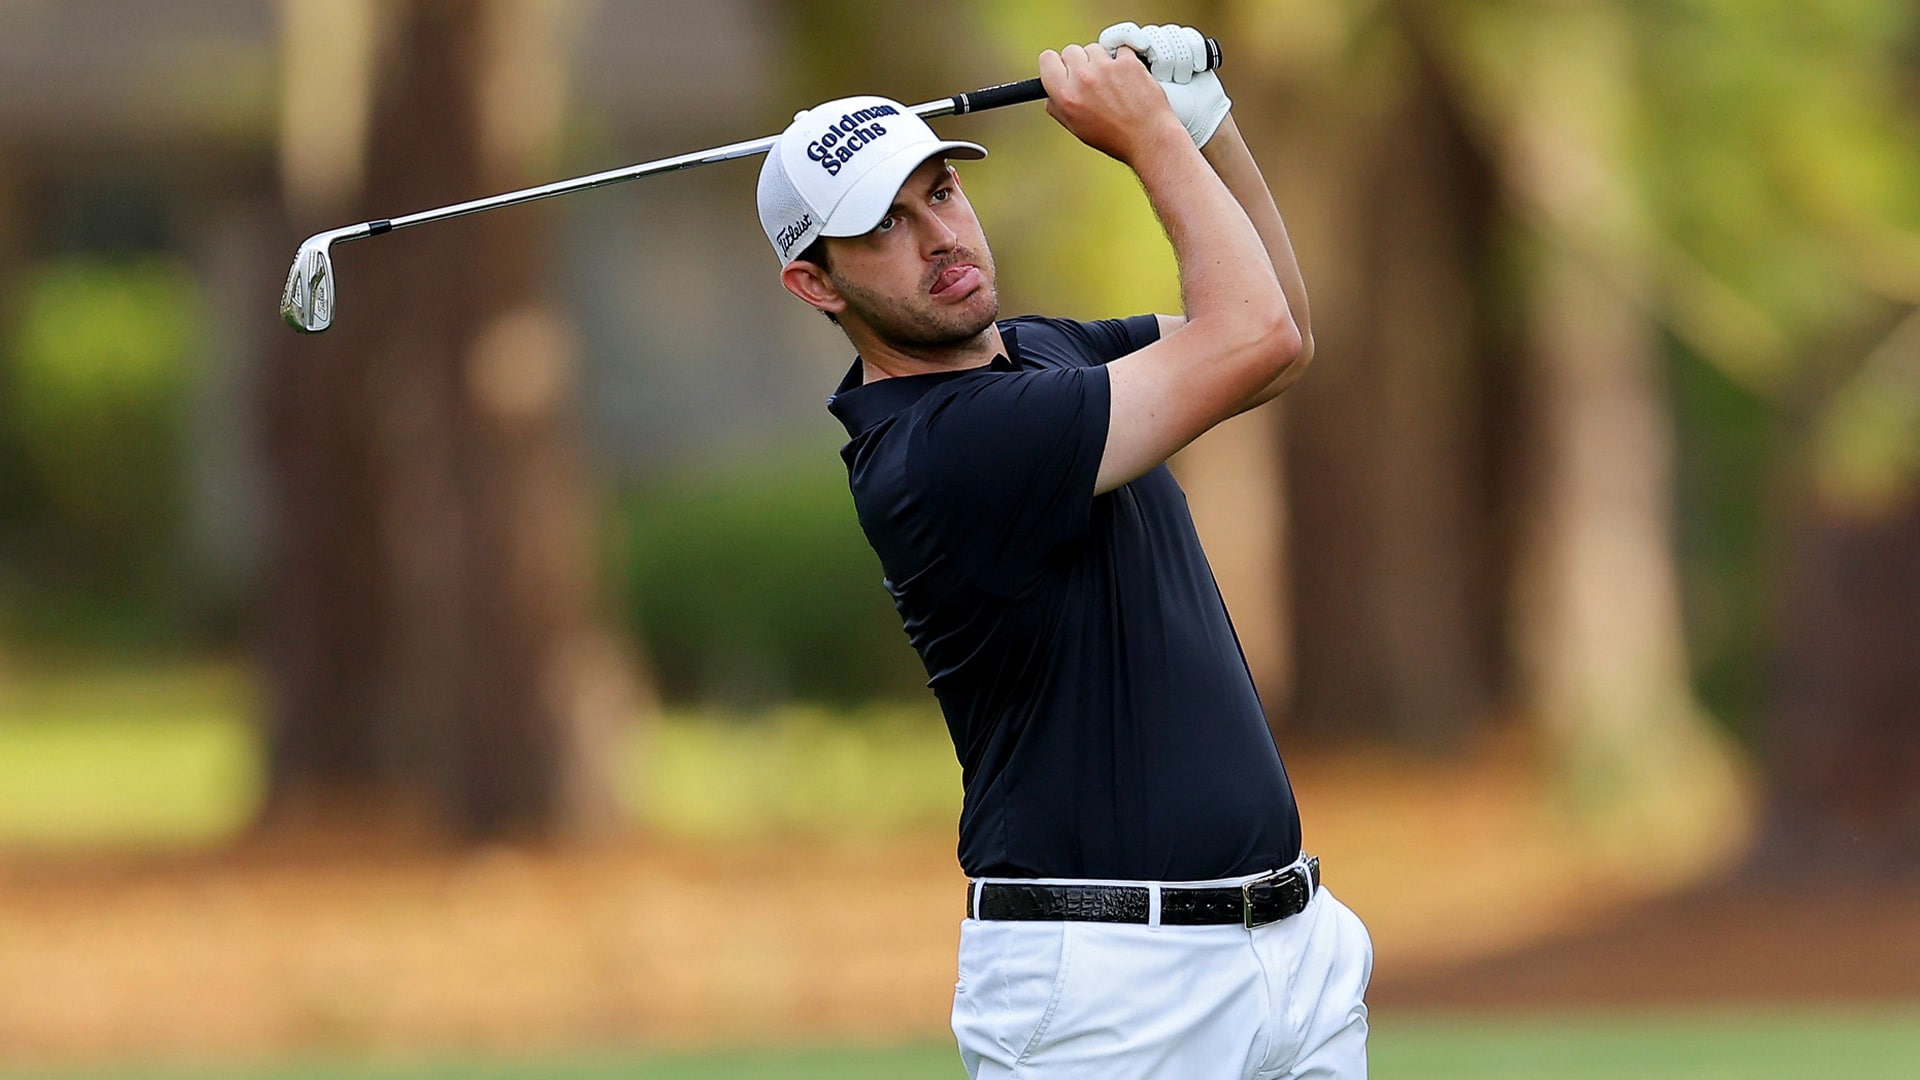 Looking for first win of 2022, Patrick Cantlay takes 36-hole RBC Heritage lead